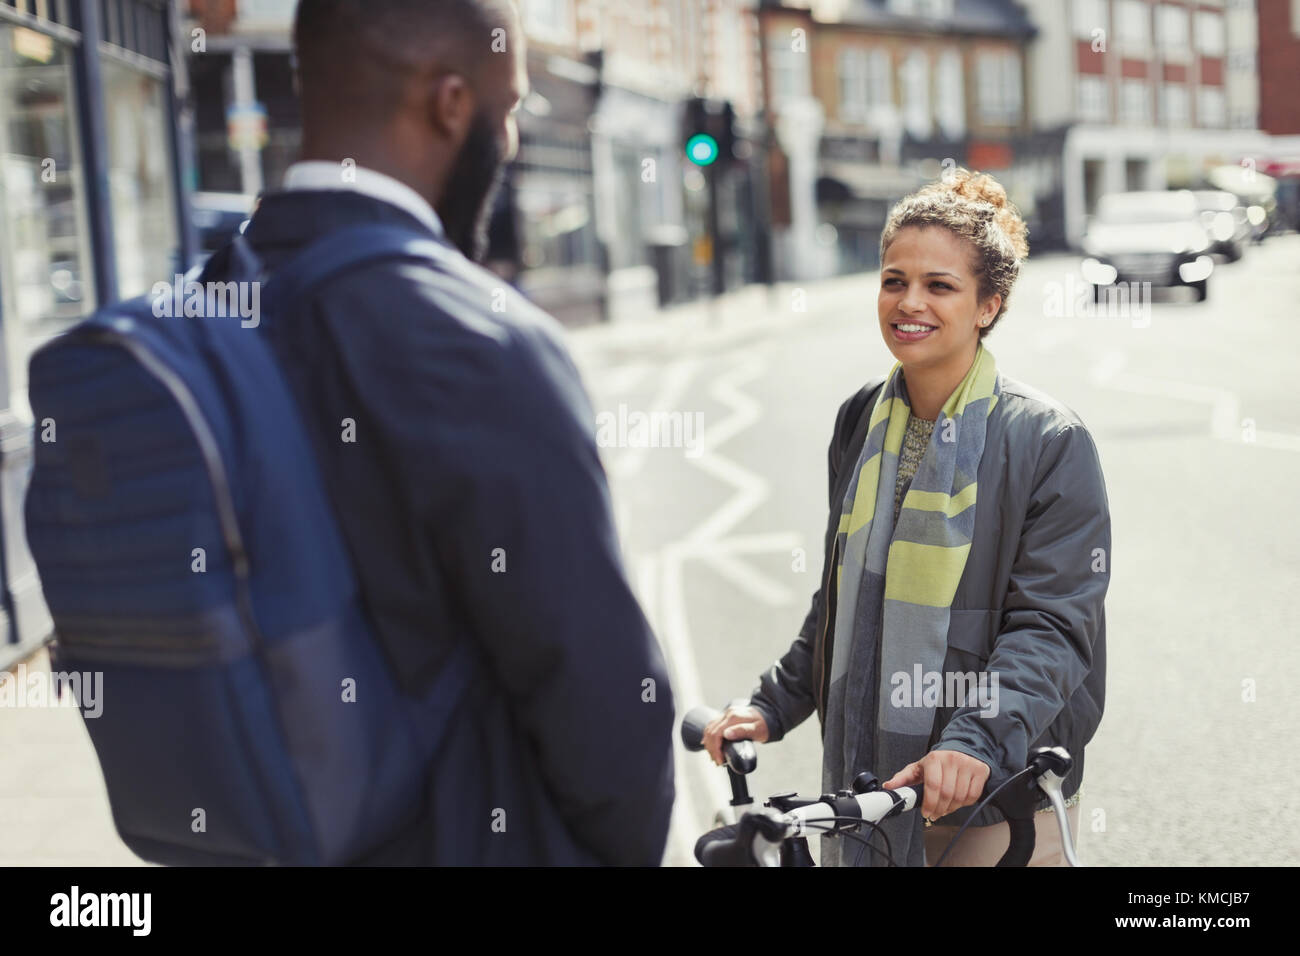 Friends with bicycle talking on sunny urban street Stock Photo